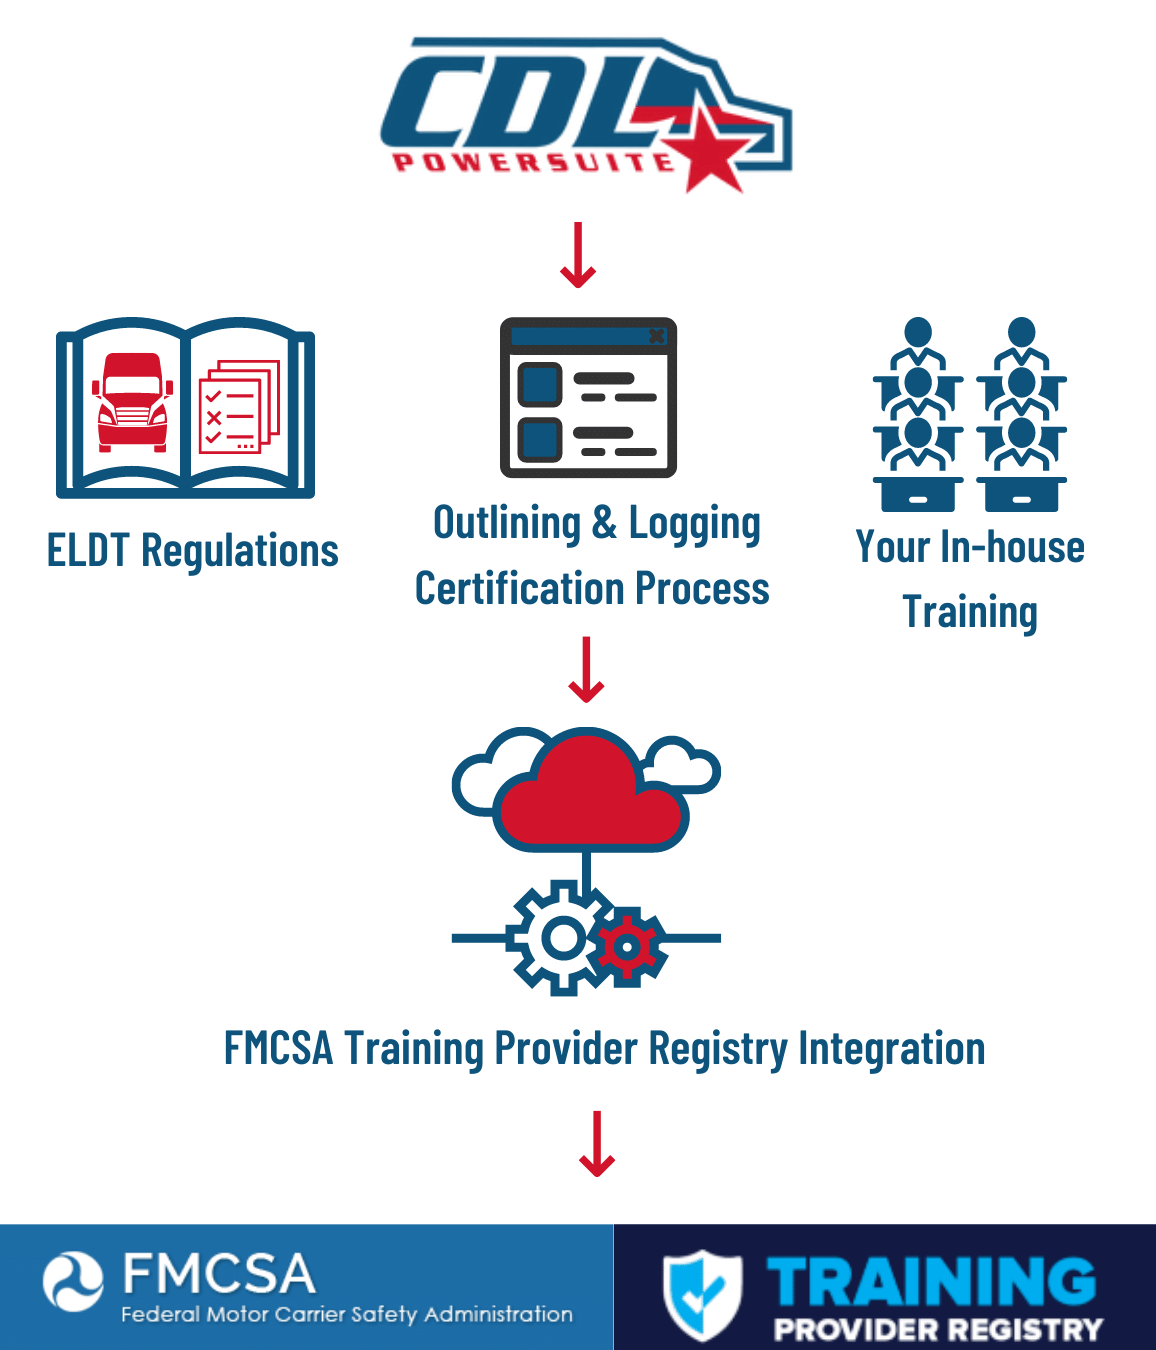 a diagram showing how CDL PowerSuite integrations works with FMCSA  training provider registry.